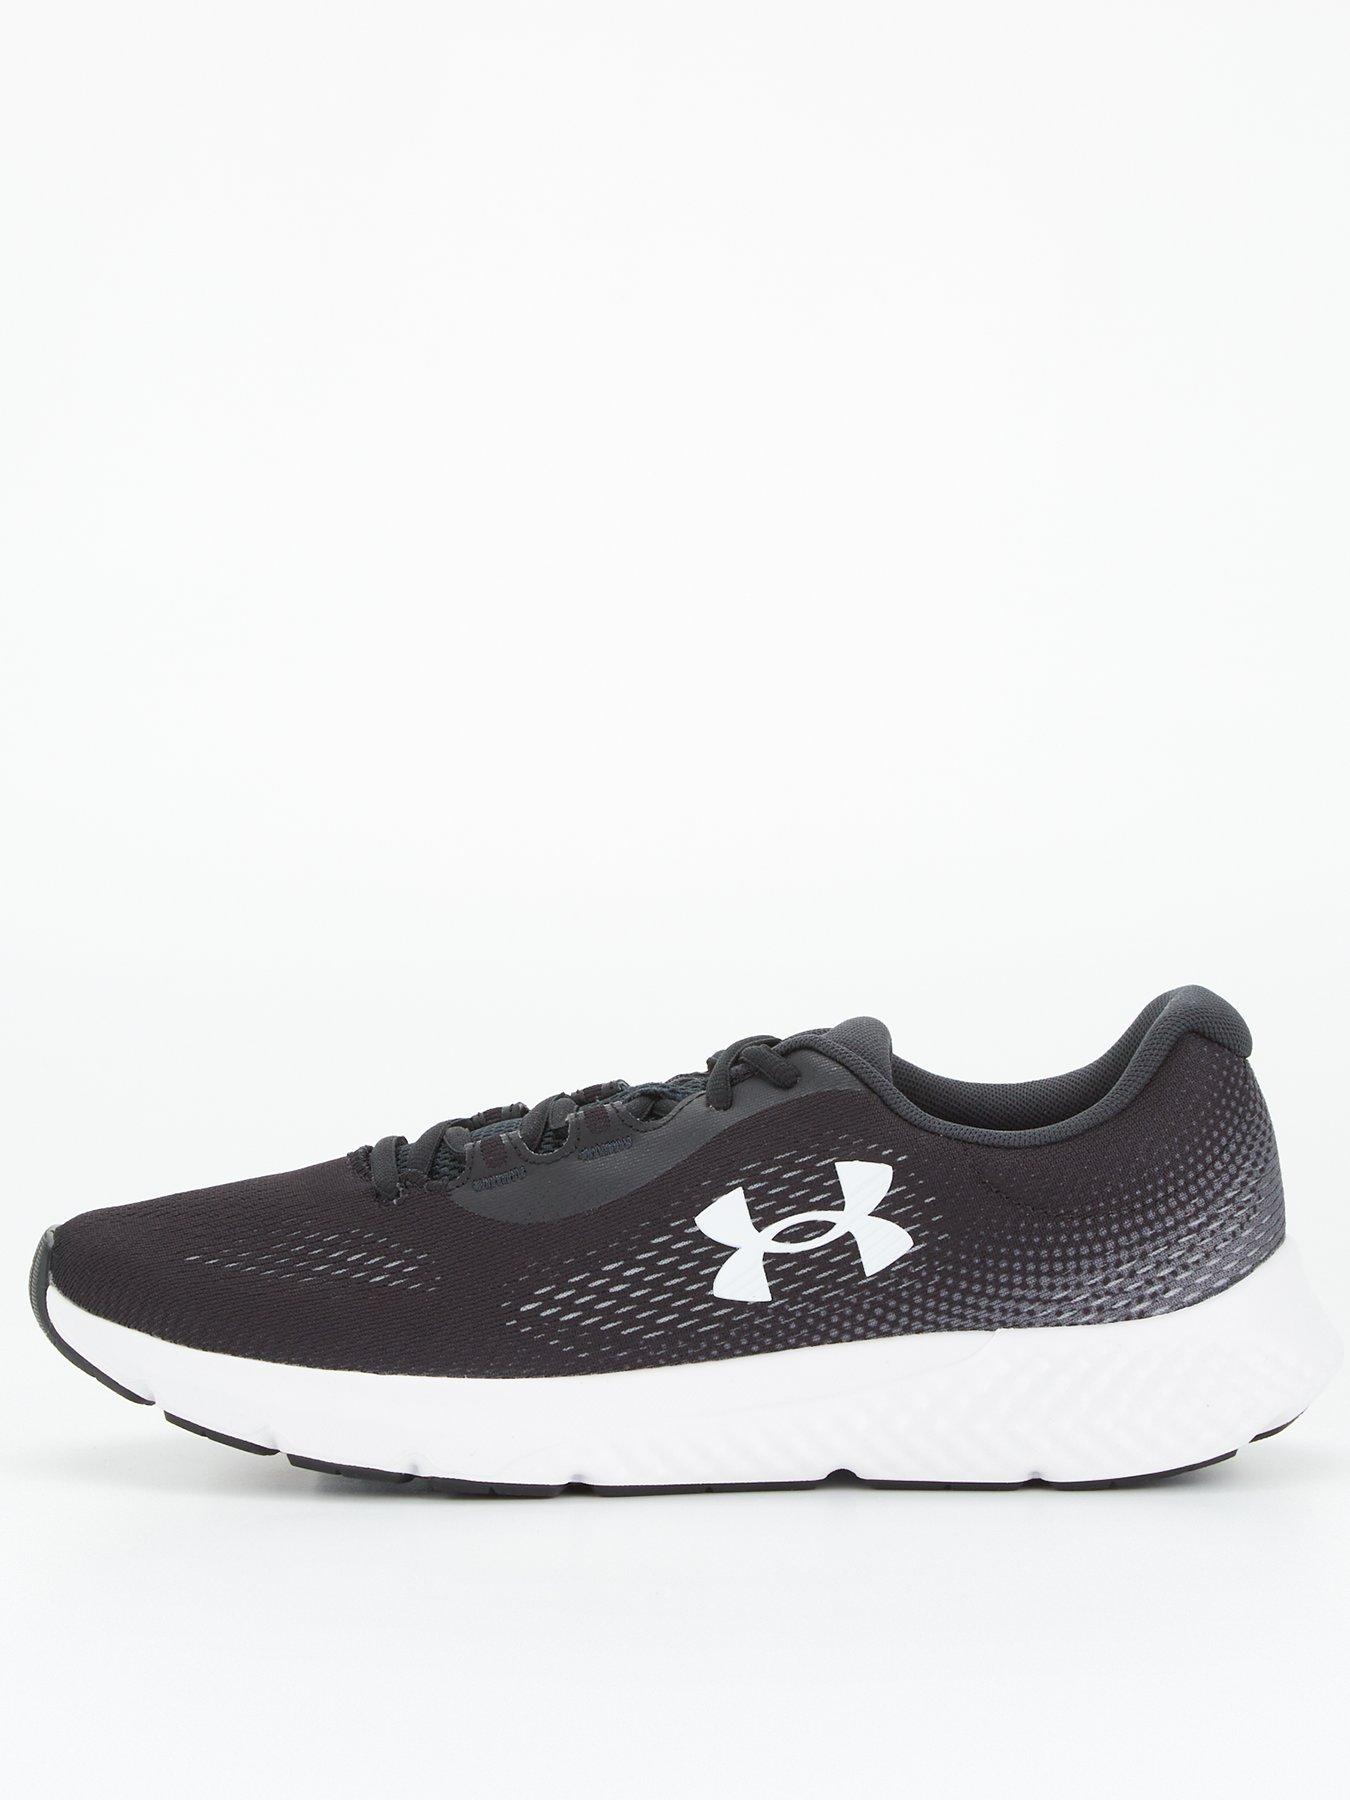 UNDER ARMOUR Charged Rogue 3 Storm Trainers - White